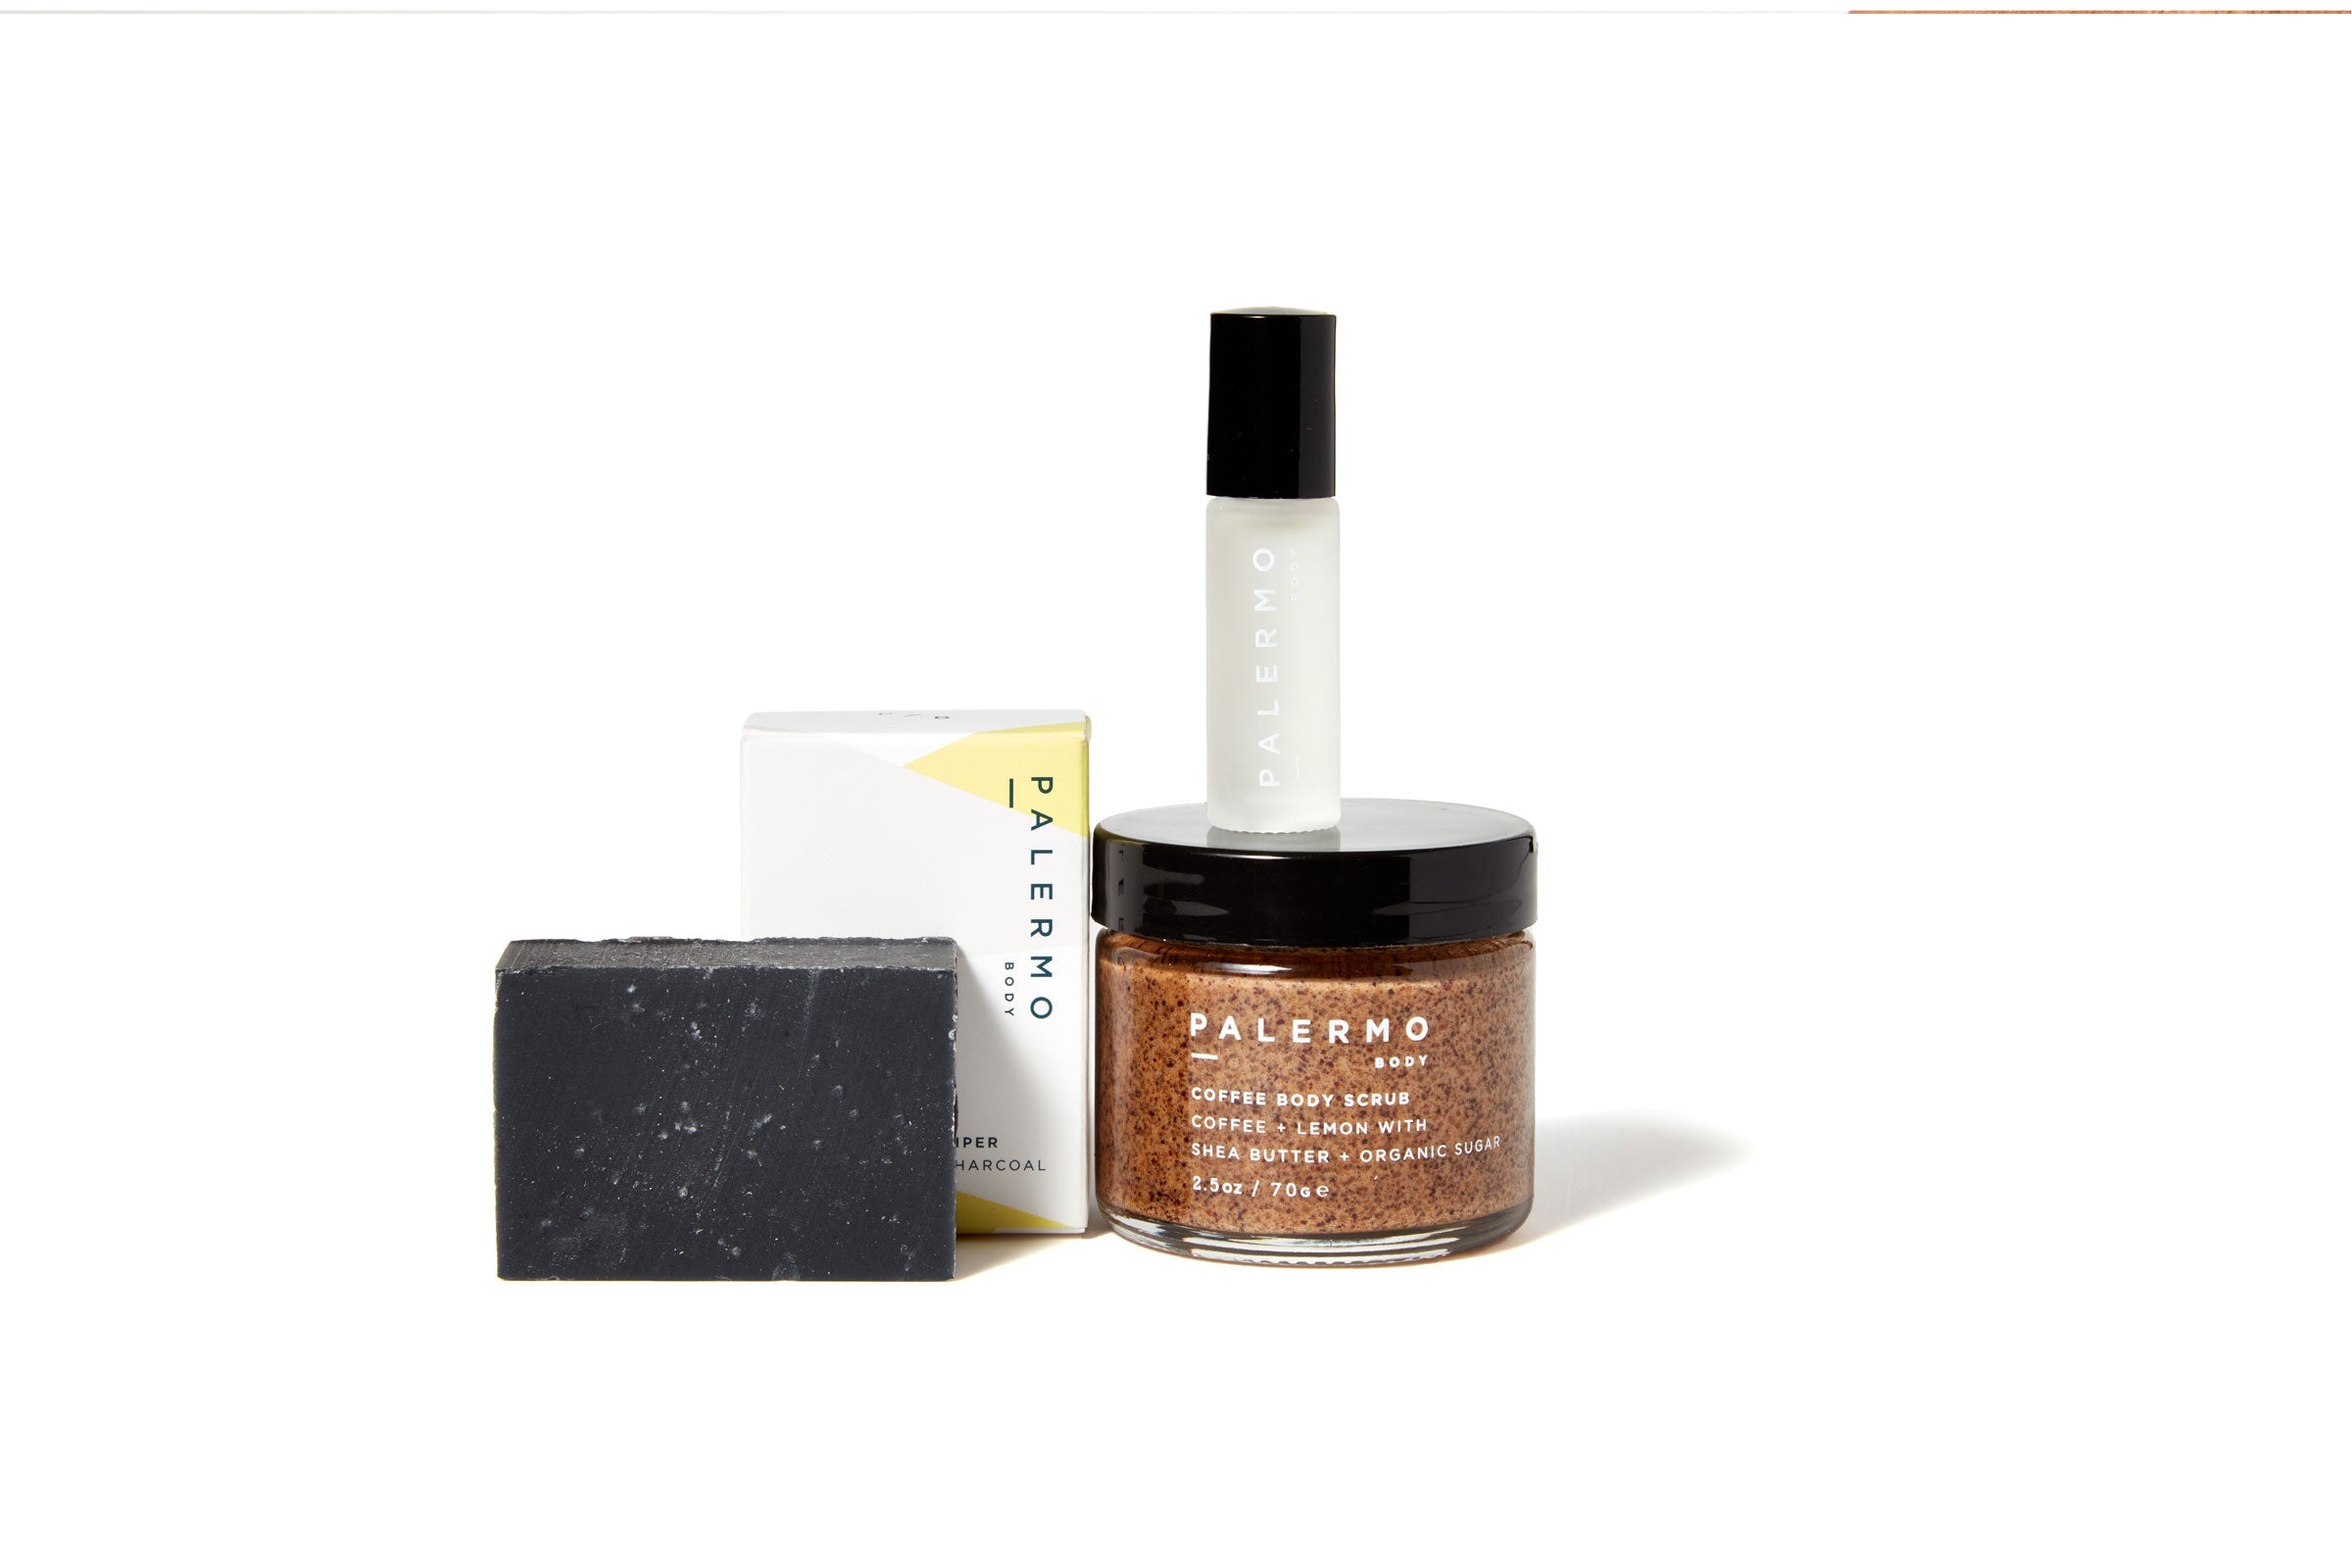  Energize + Enliven Mindful Kit by Palermo Body Palermo Body Perfumarie